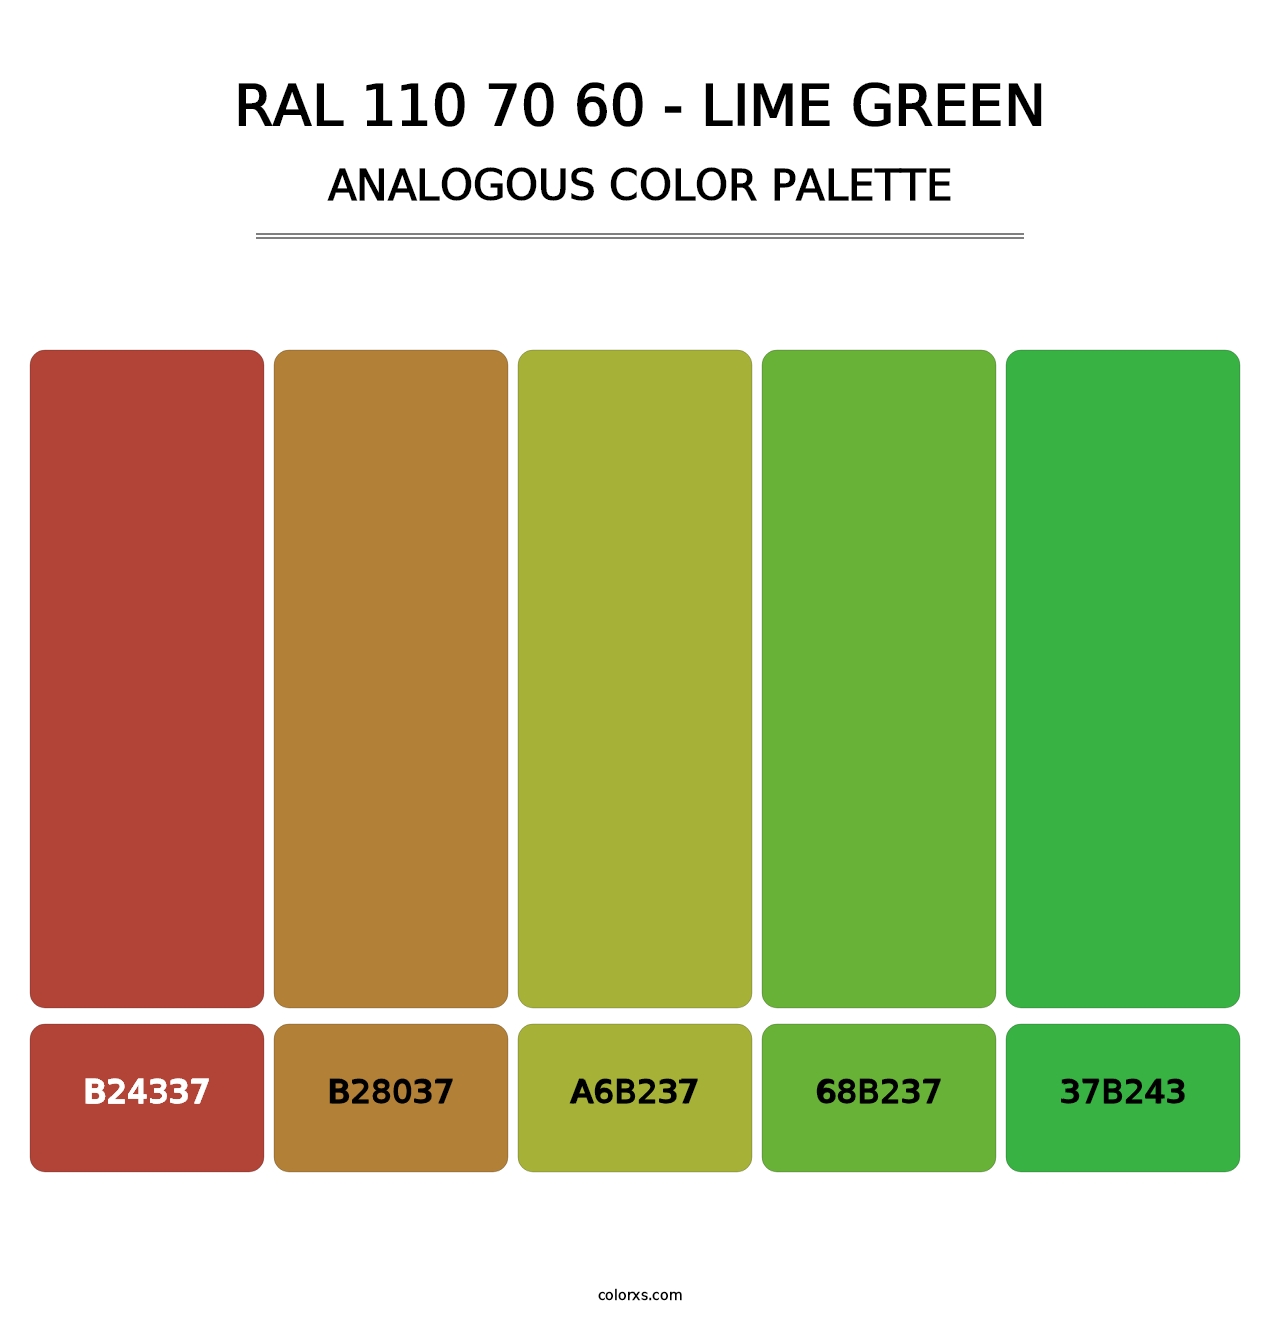 RAL 110 70 60 - Lime Green - Analogous Color Palette